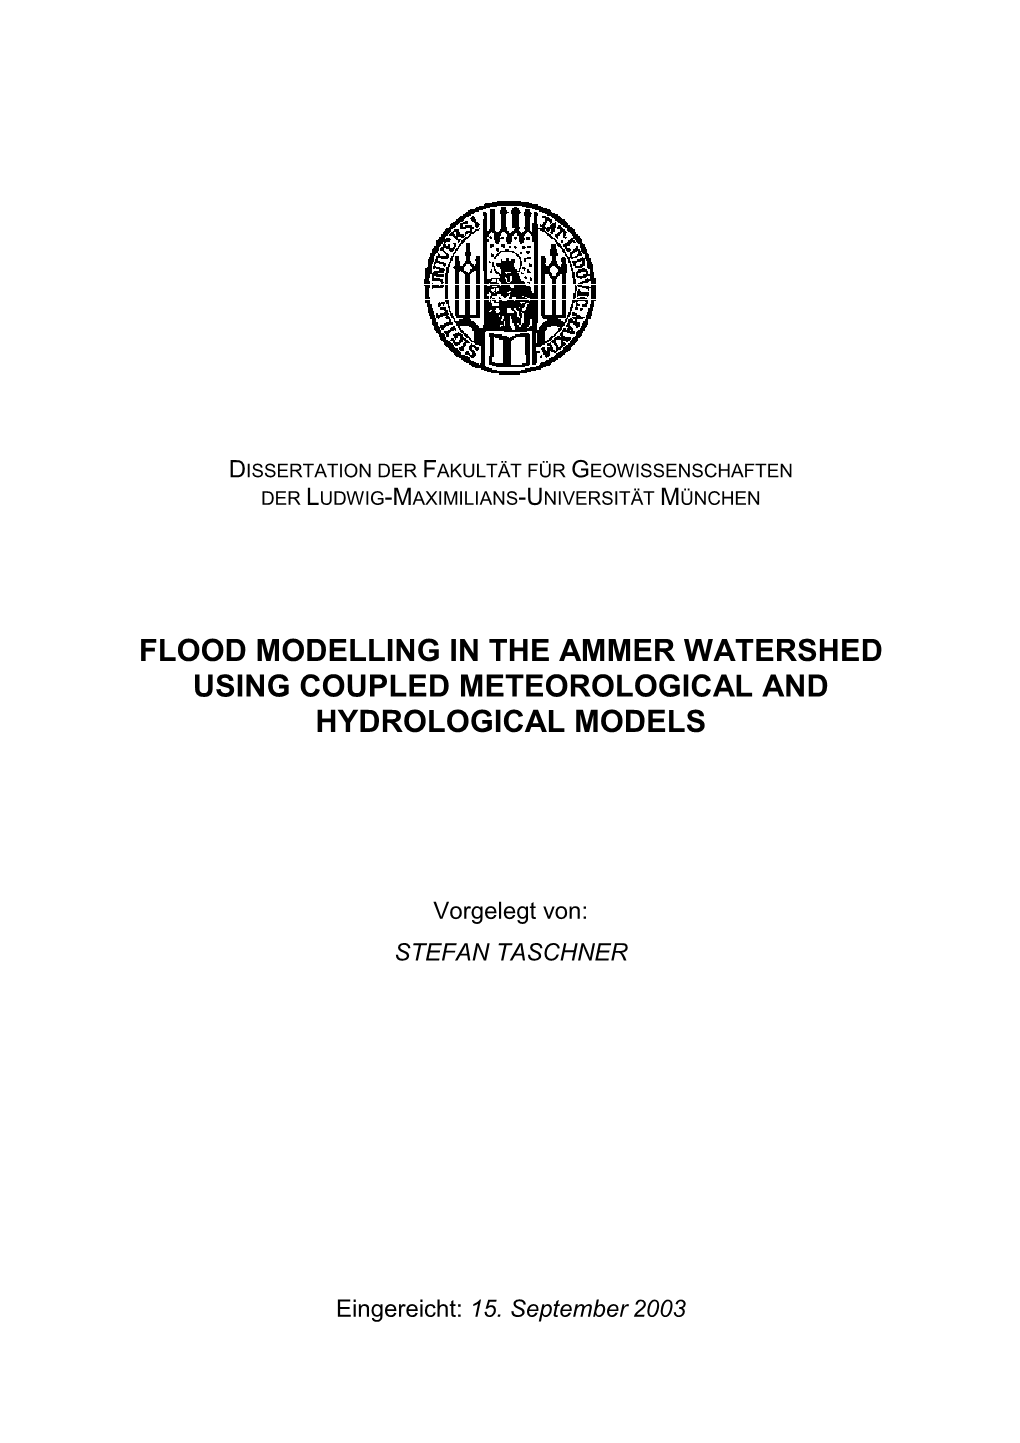 Flood Modelling in the Ammer Watershed Using Meteorological and Hydrological Models